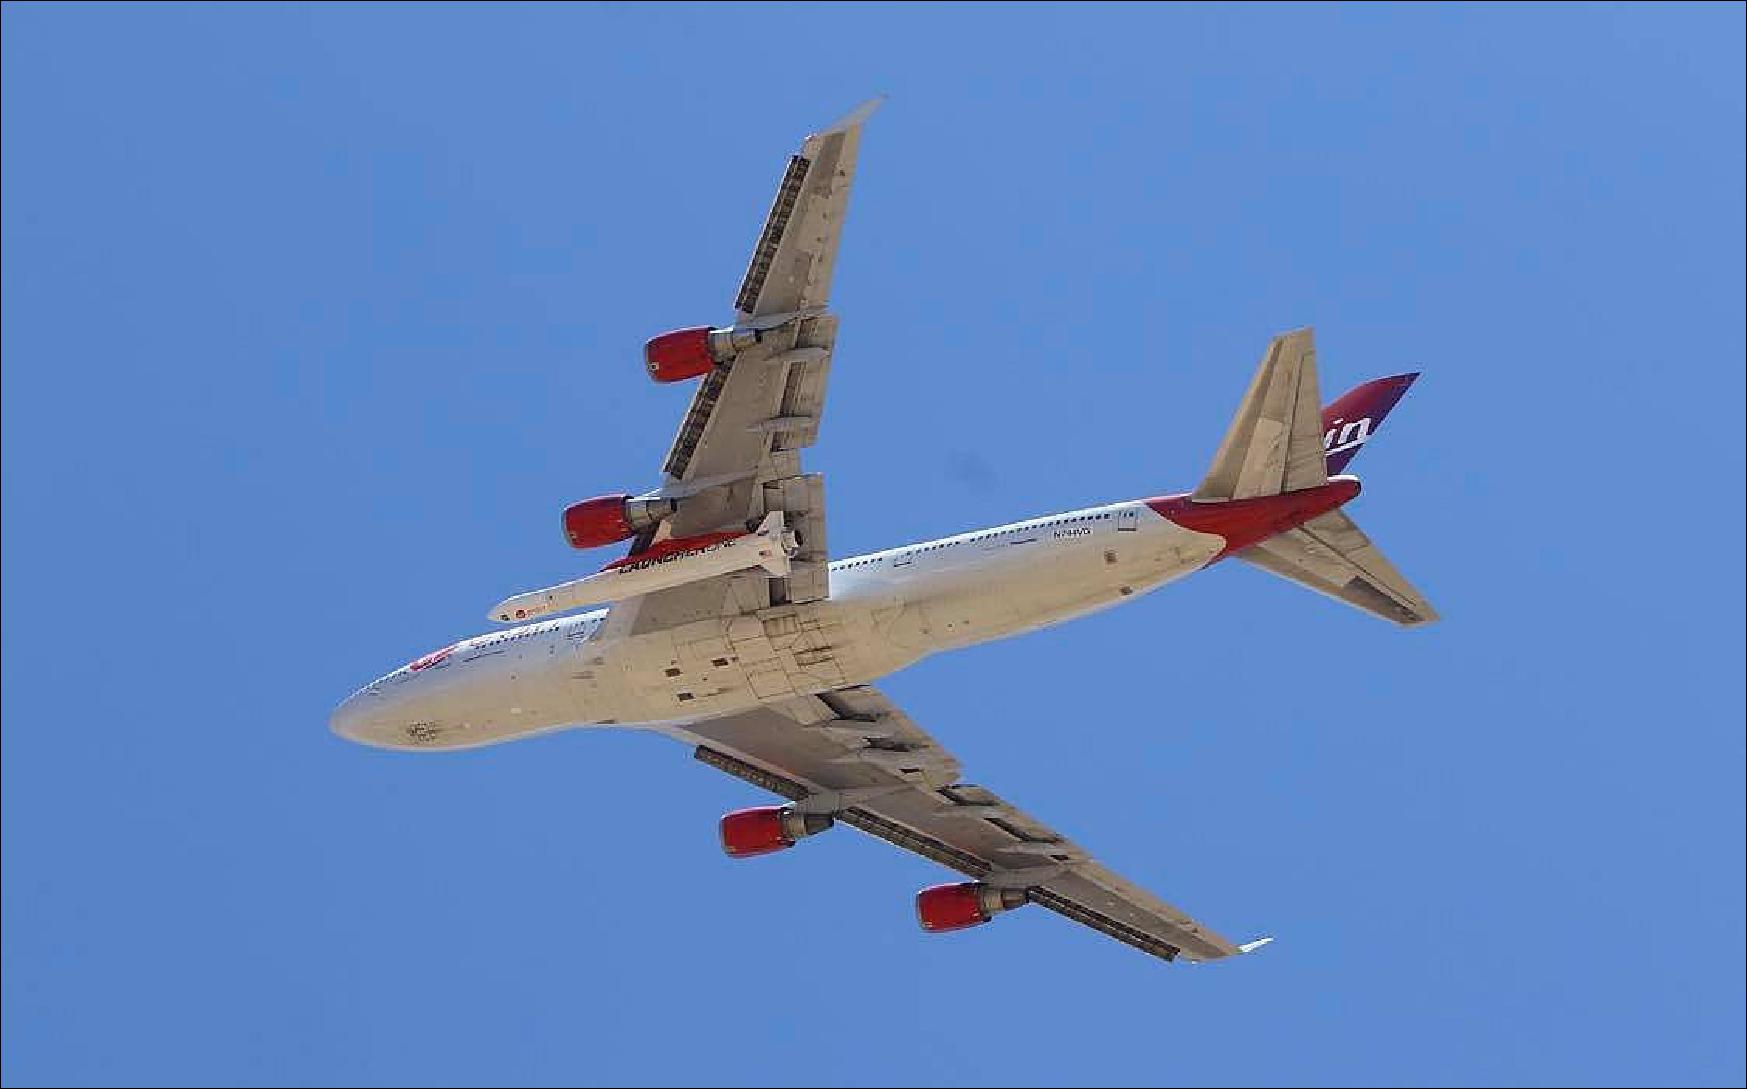 Figure 10: Virgin Orbit’s carrier aircraft — a Boeing 747 named “Cosmic Girl” — took off from Mojave Air and Space Port at 2:56 p.m. EDT (11:56 a.m. EDT) Monday (25 May 2020) with the company’s LauncherOne rocket under its left wing (image credit: Matt Hartman / Shorealone Films)